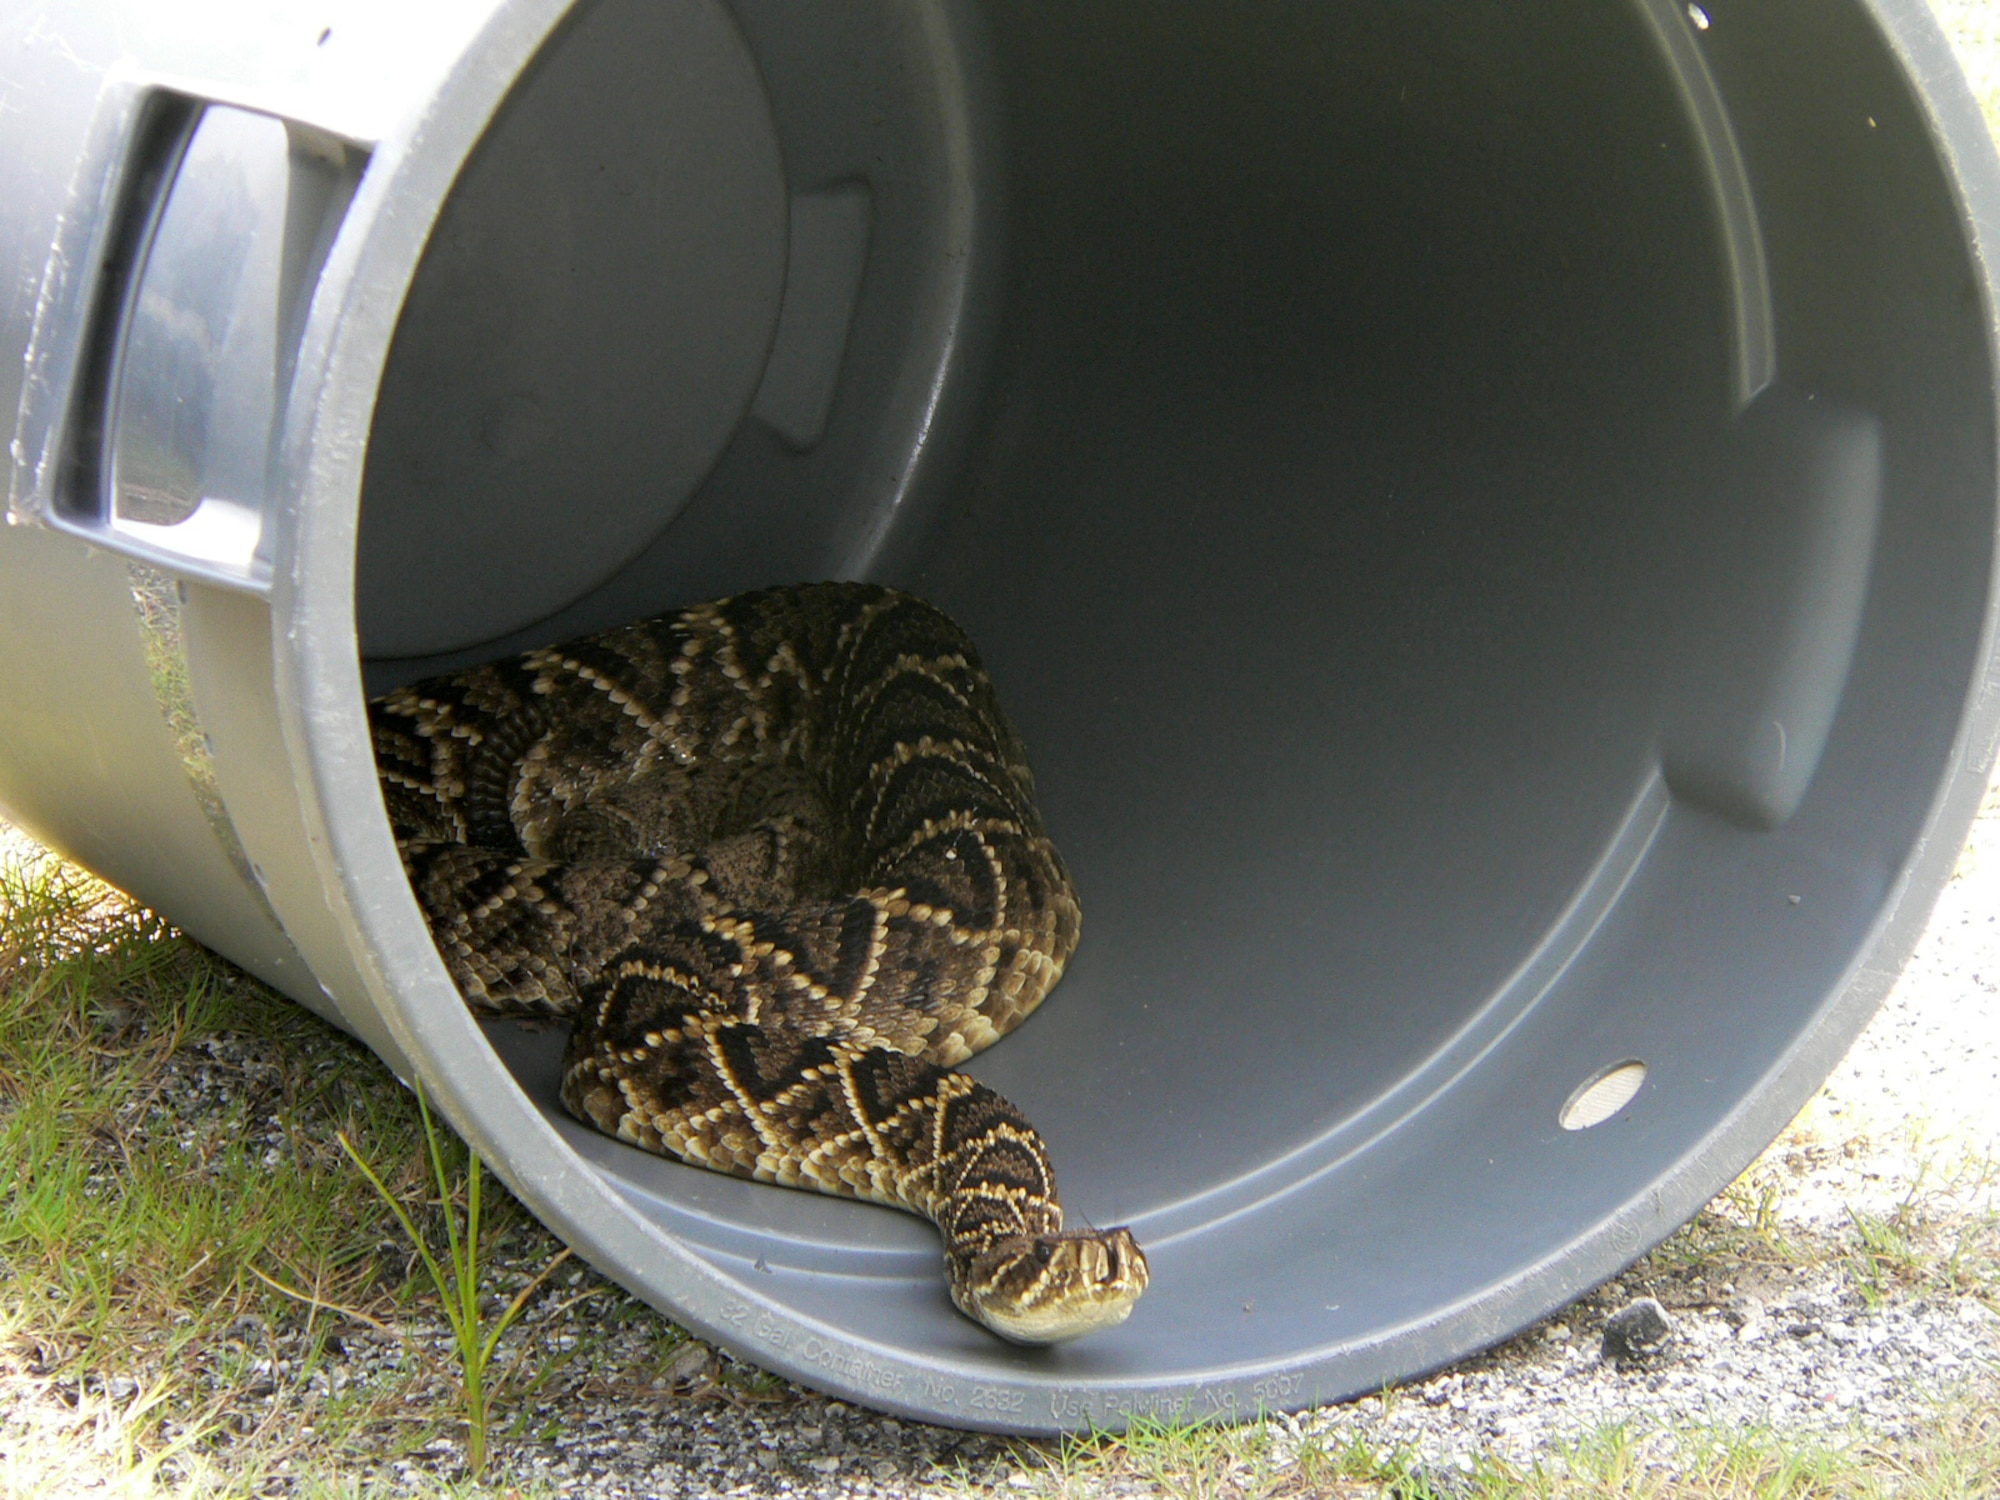 An eastern diamondback rattlesnake rests in a barrel in this 2008 photo at Hurlburt Field, Fla. The base pest management shop retrieved the snake and later released it on the Eglin Range. (Courtesy photo)